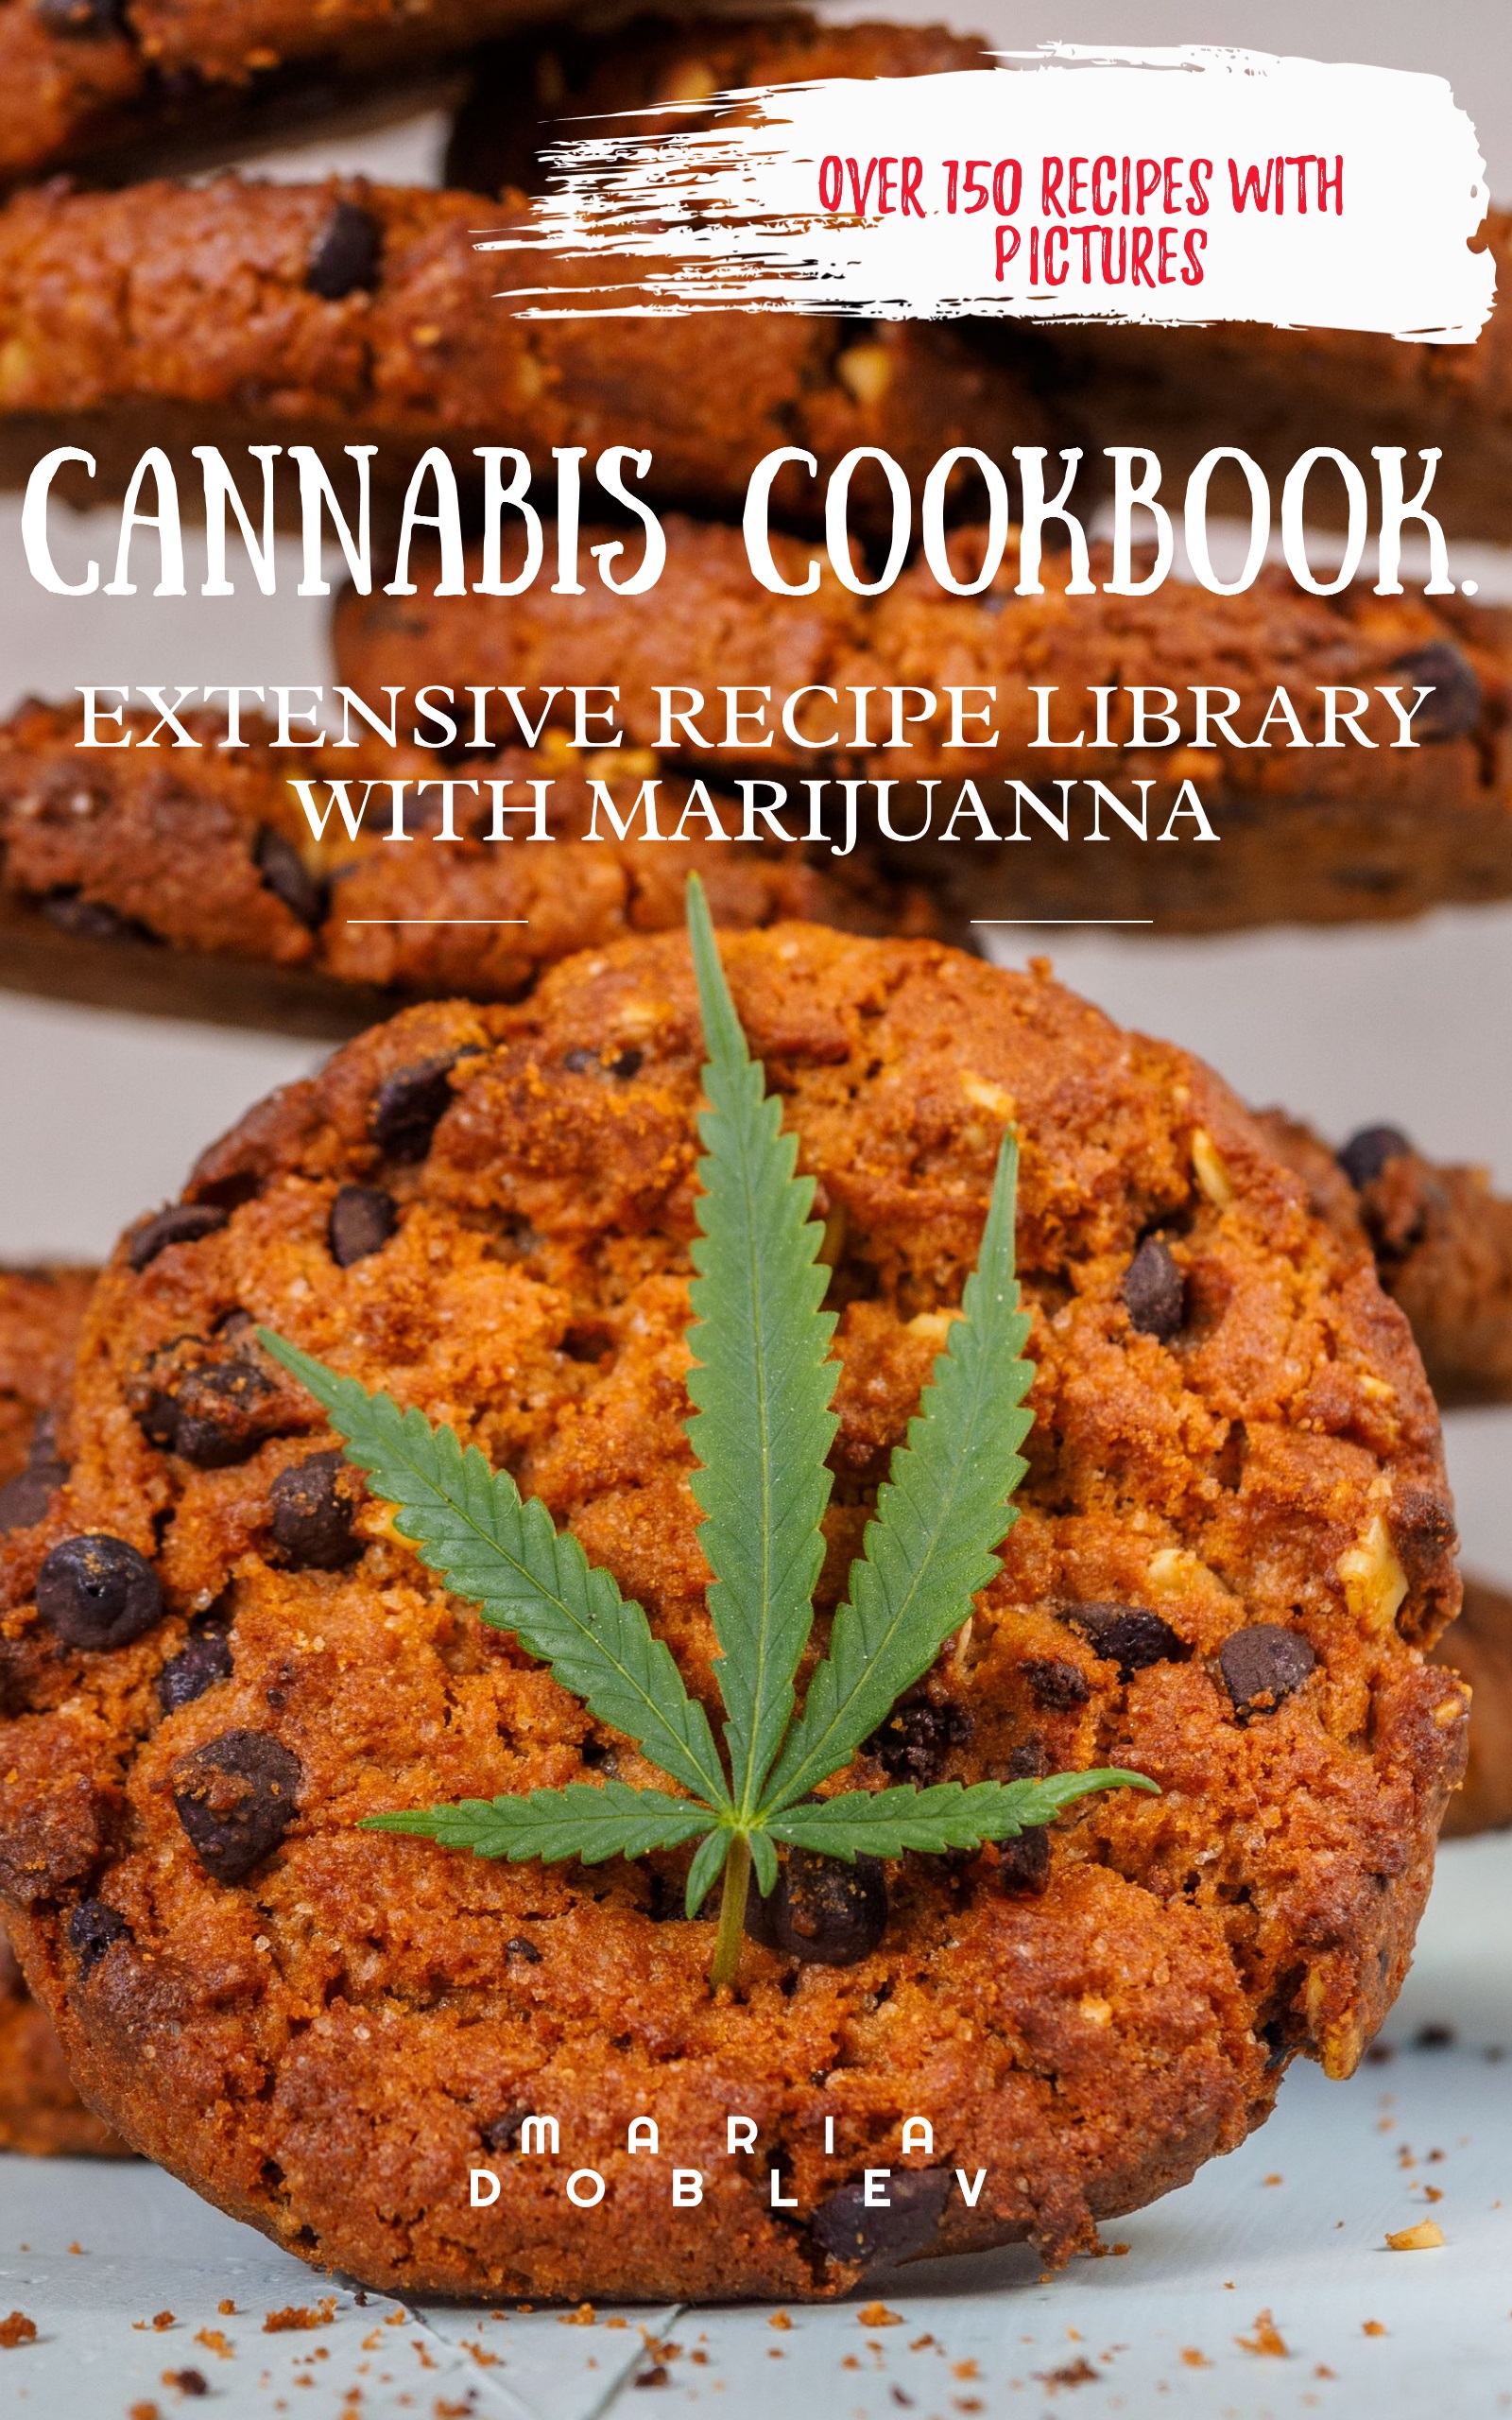 FREE: Cannabis Cookbook.: Extensive Recipe Library with Marijuanna by Maria Doblev